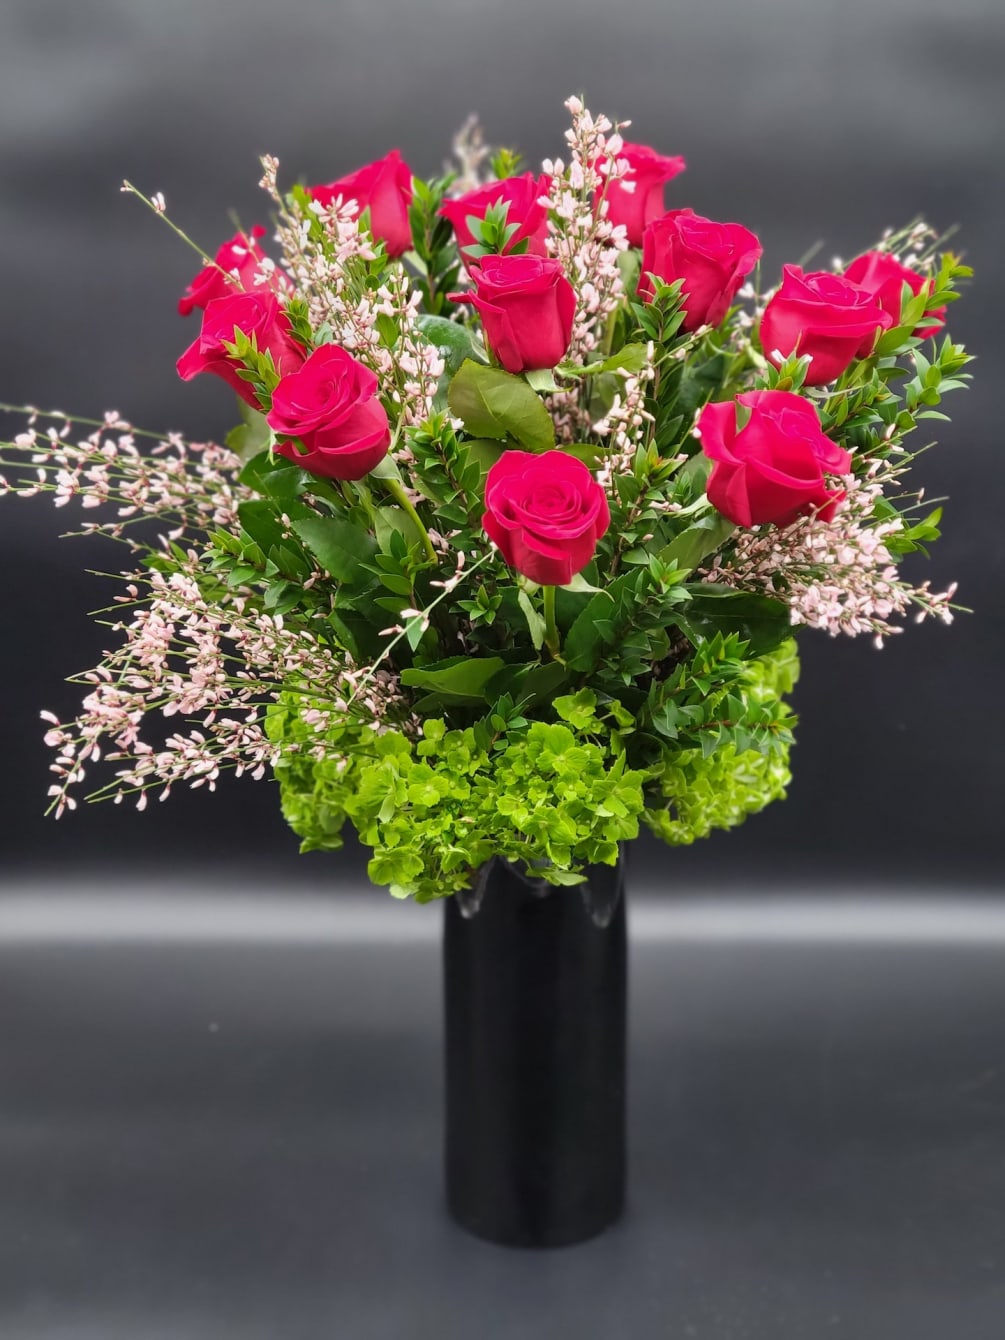 Glass vase will display a burst of exquisite pink roses sure to